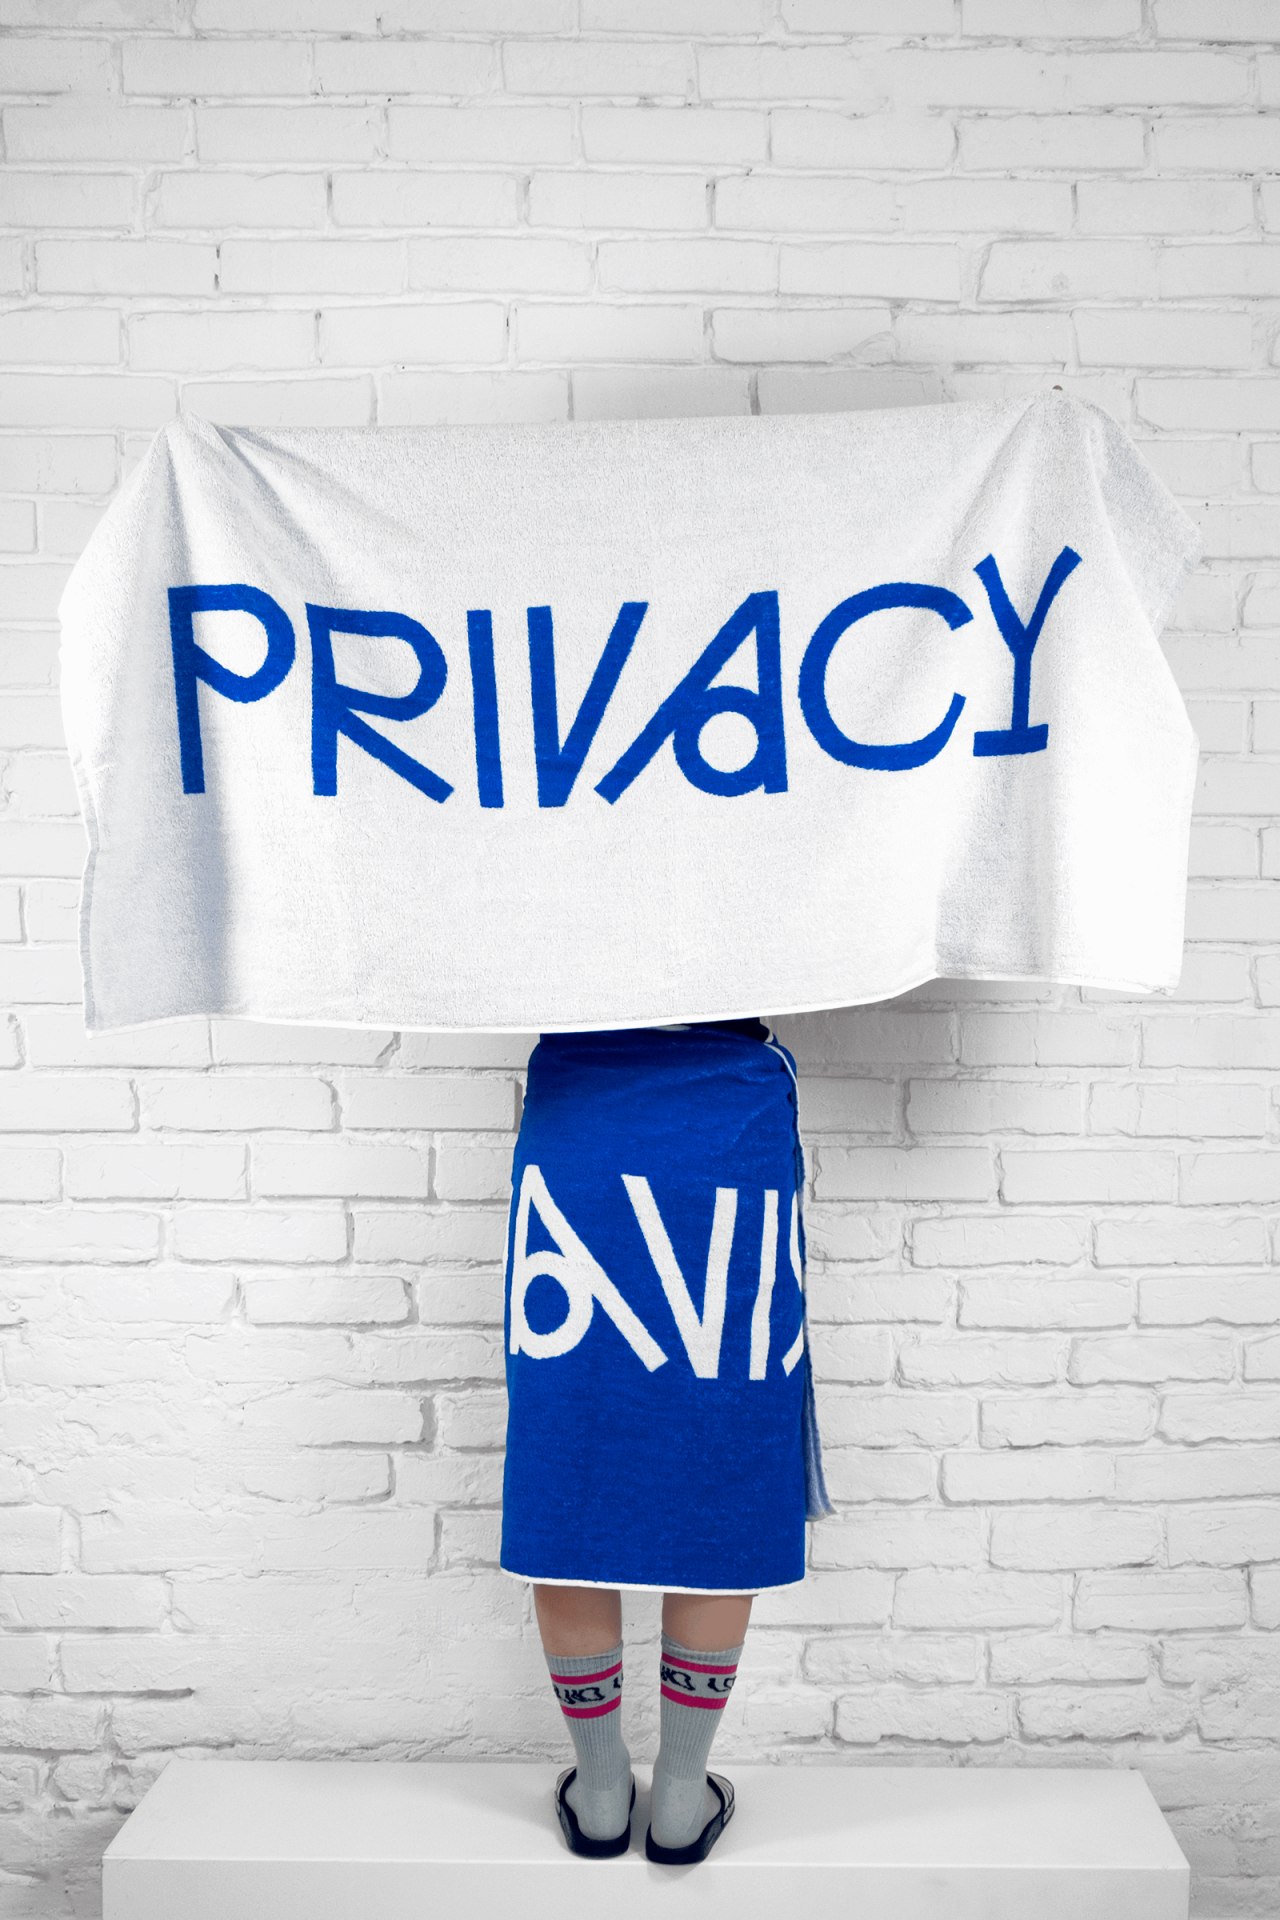 PRIVACY towel